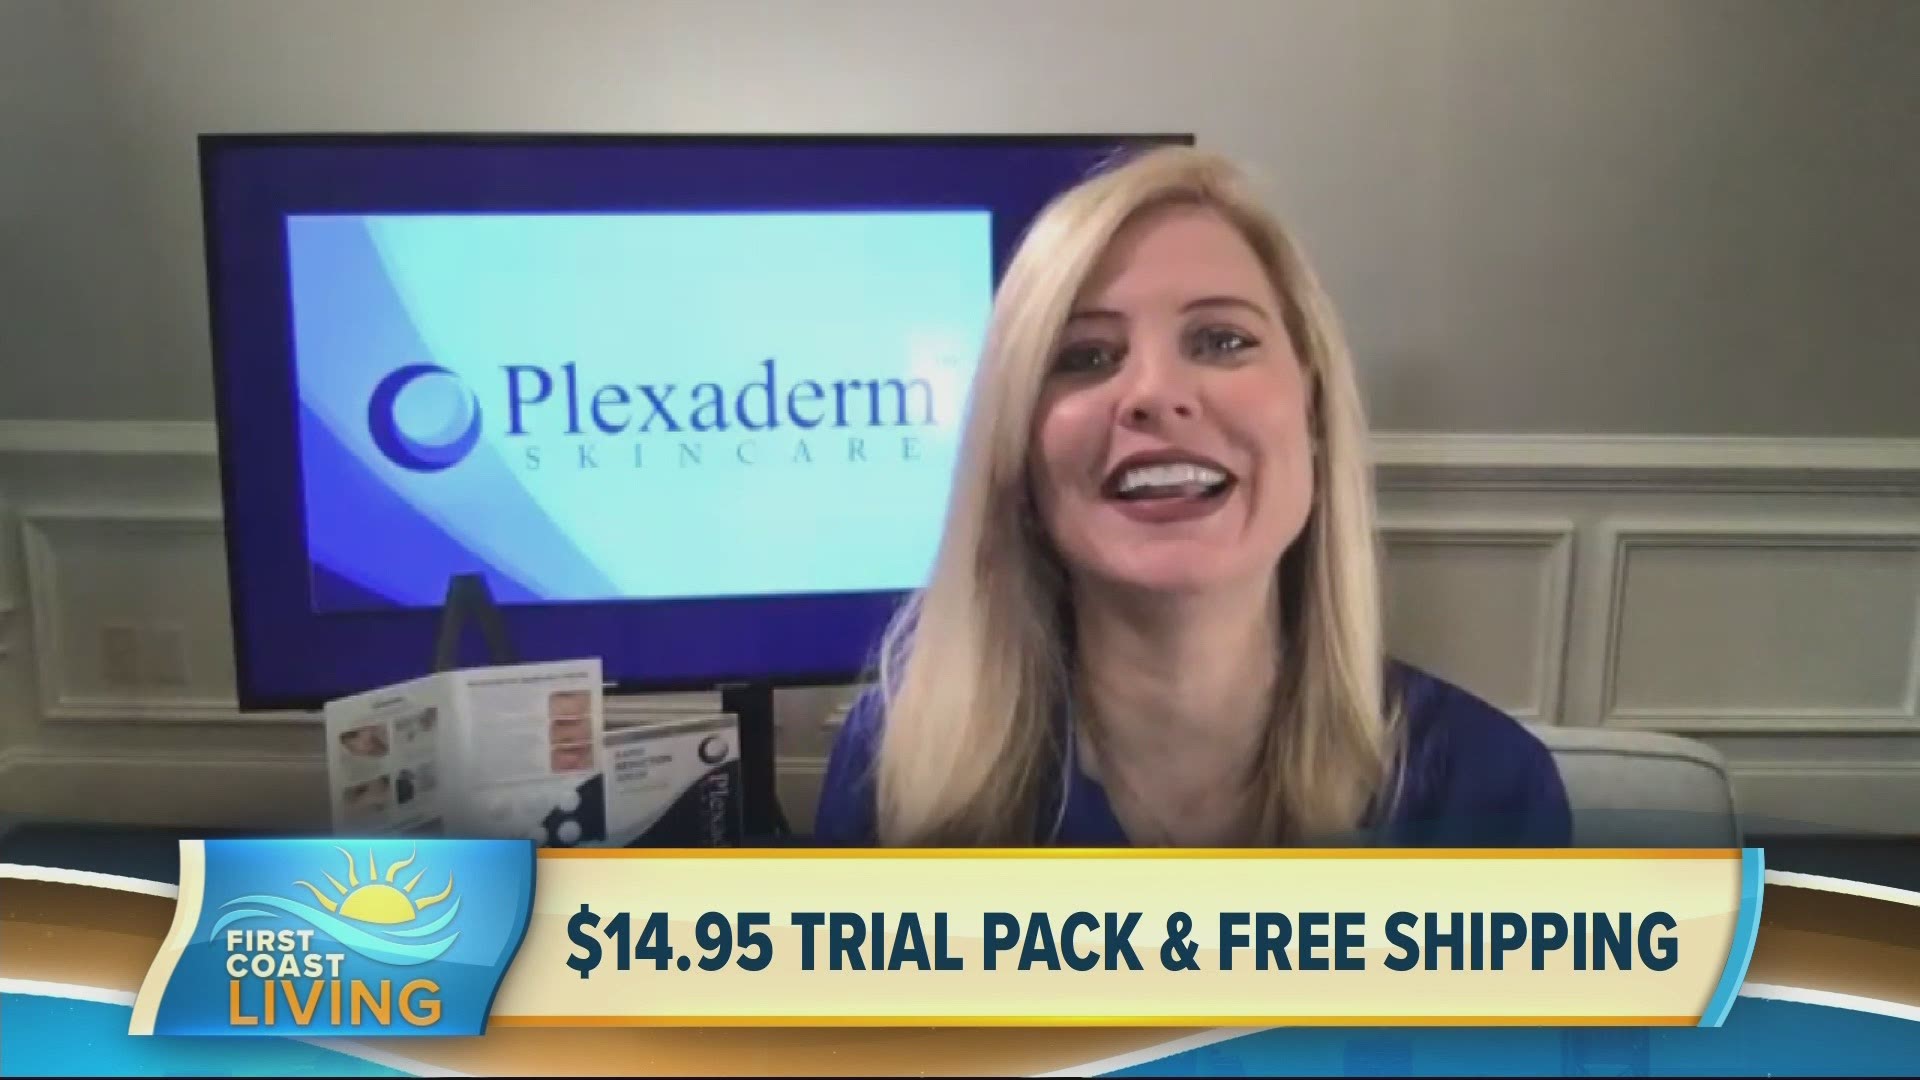 Try the 10-min Plexaderm challenge for less than $15!